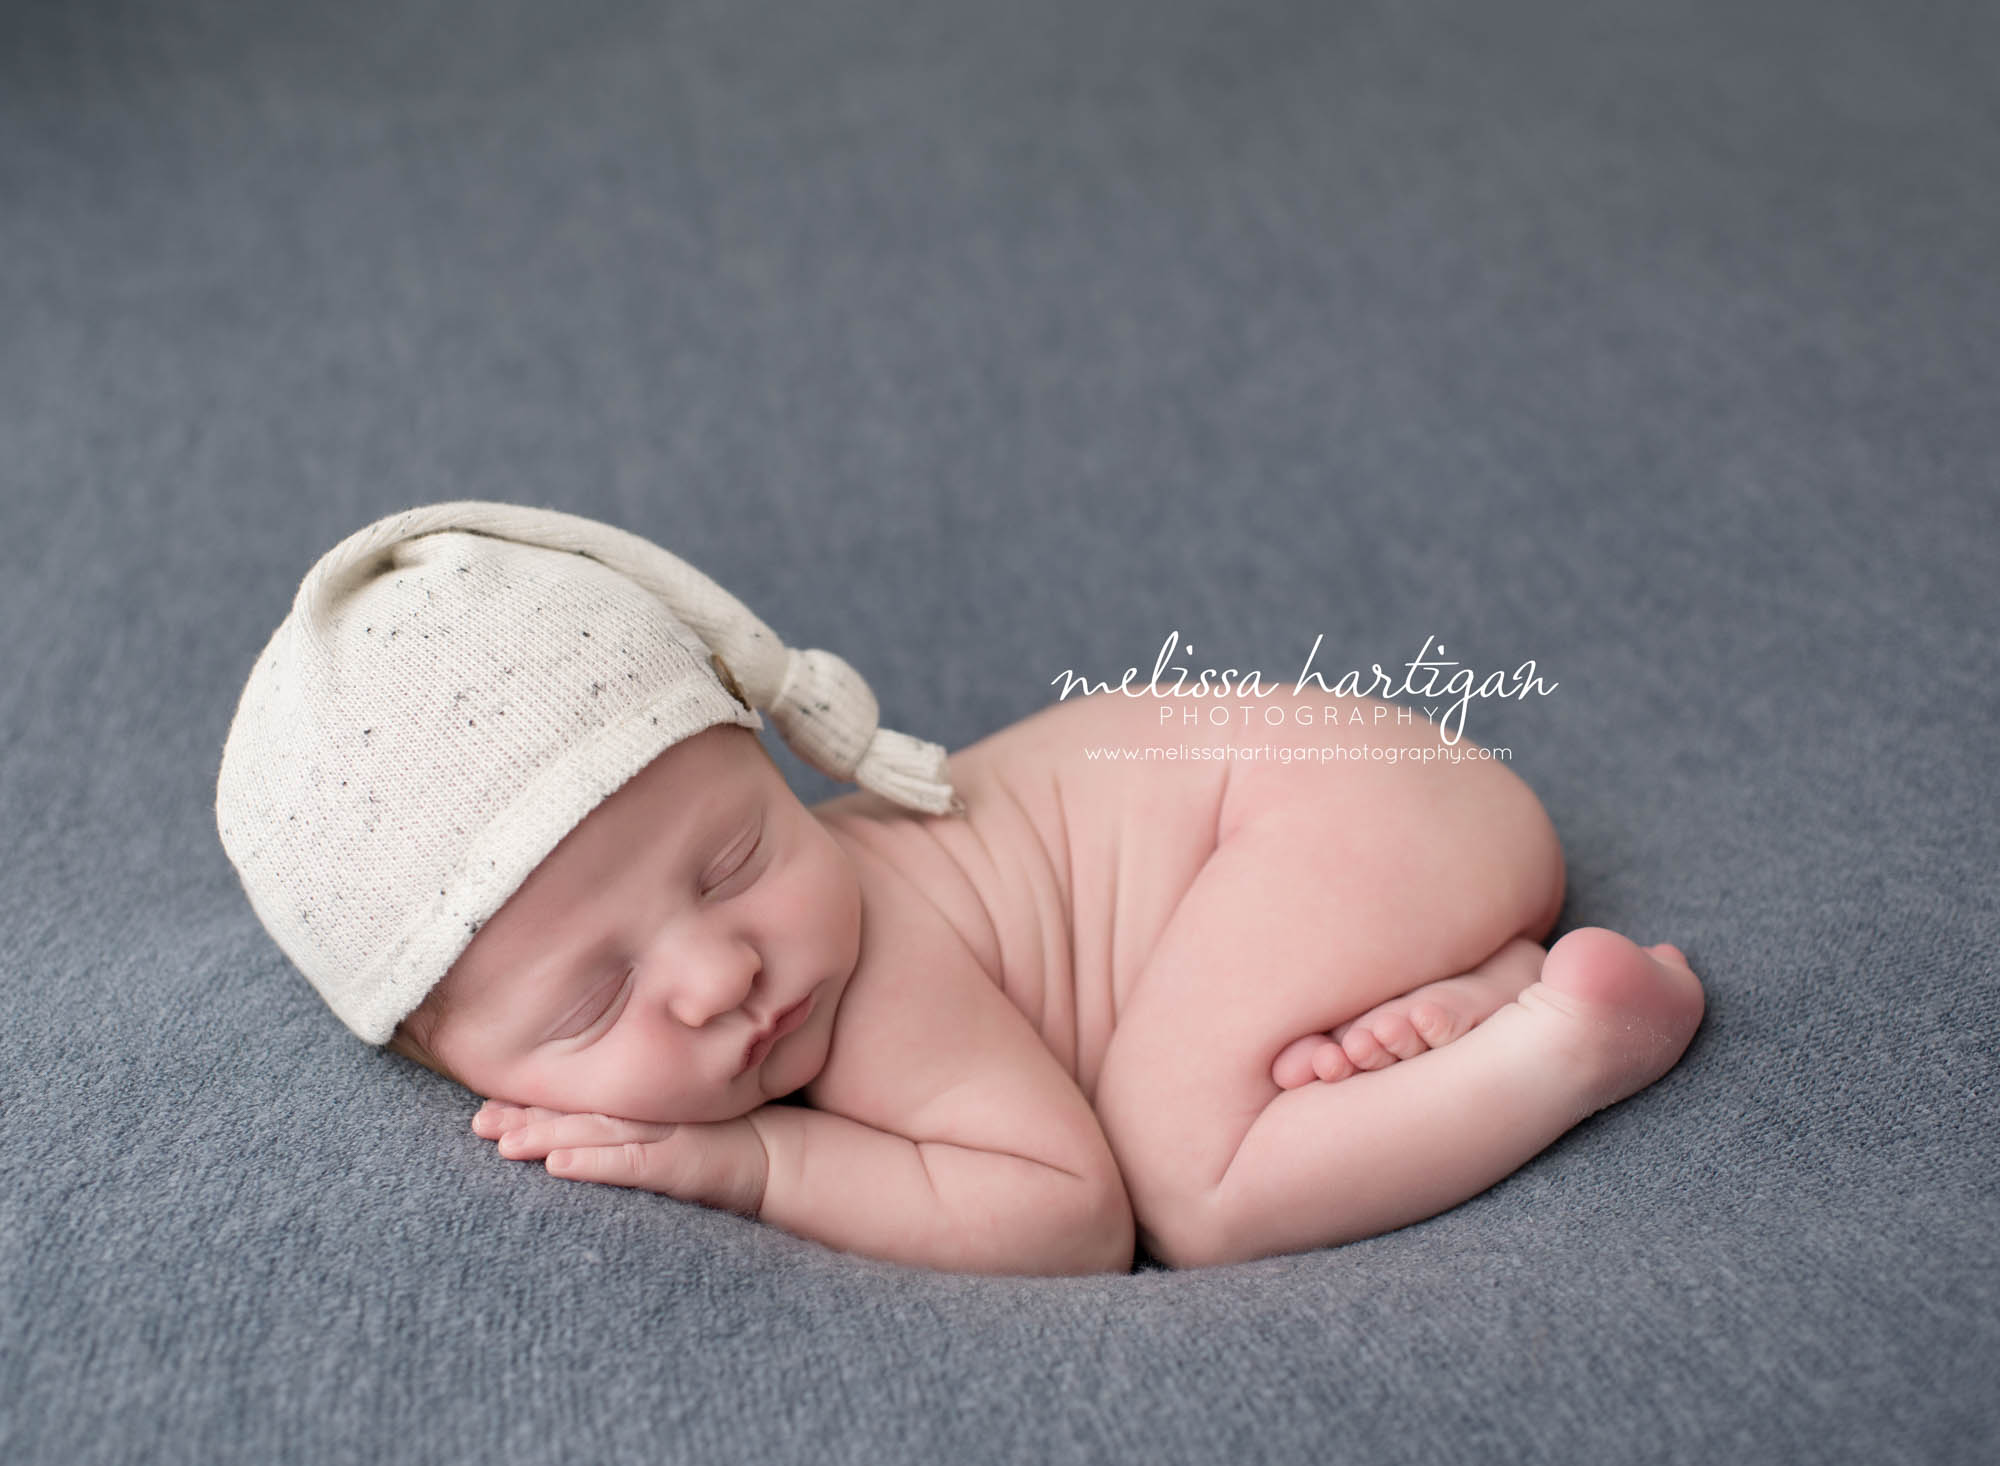 Melissa Hartigan Photography Coventry CT Newborn & Maternity Photographer Coventry CT Maternity Newborn Session Chase sleeping on blue blanket wearing cream knit hat